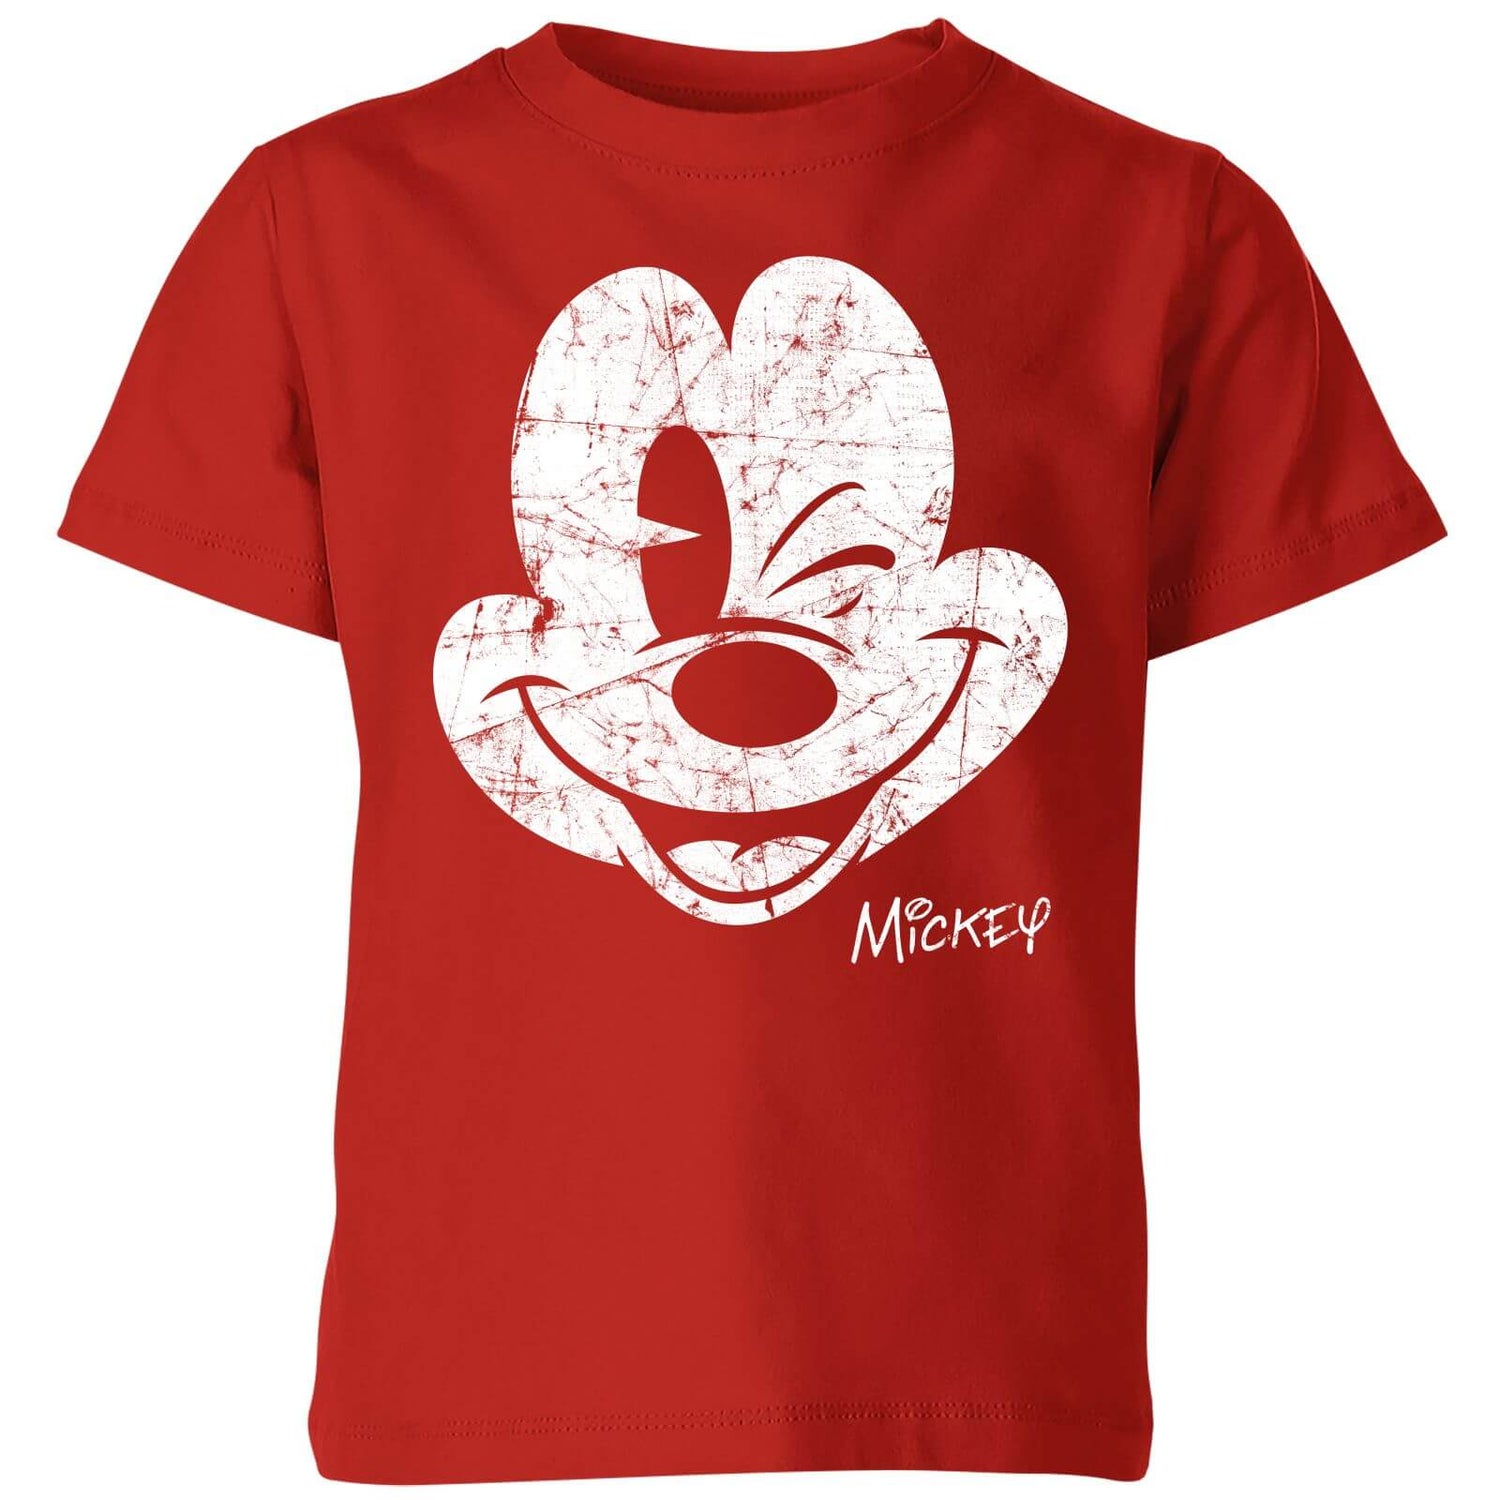 Disney Mickey Mouse Worn Face Kids' T-Shirt - Red